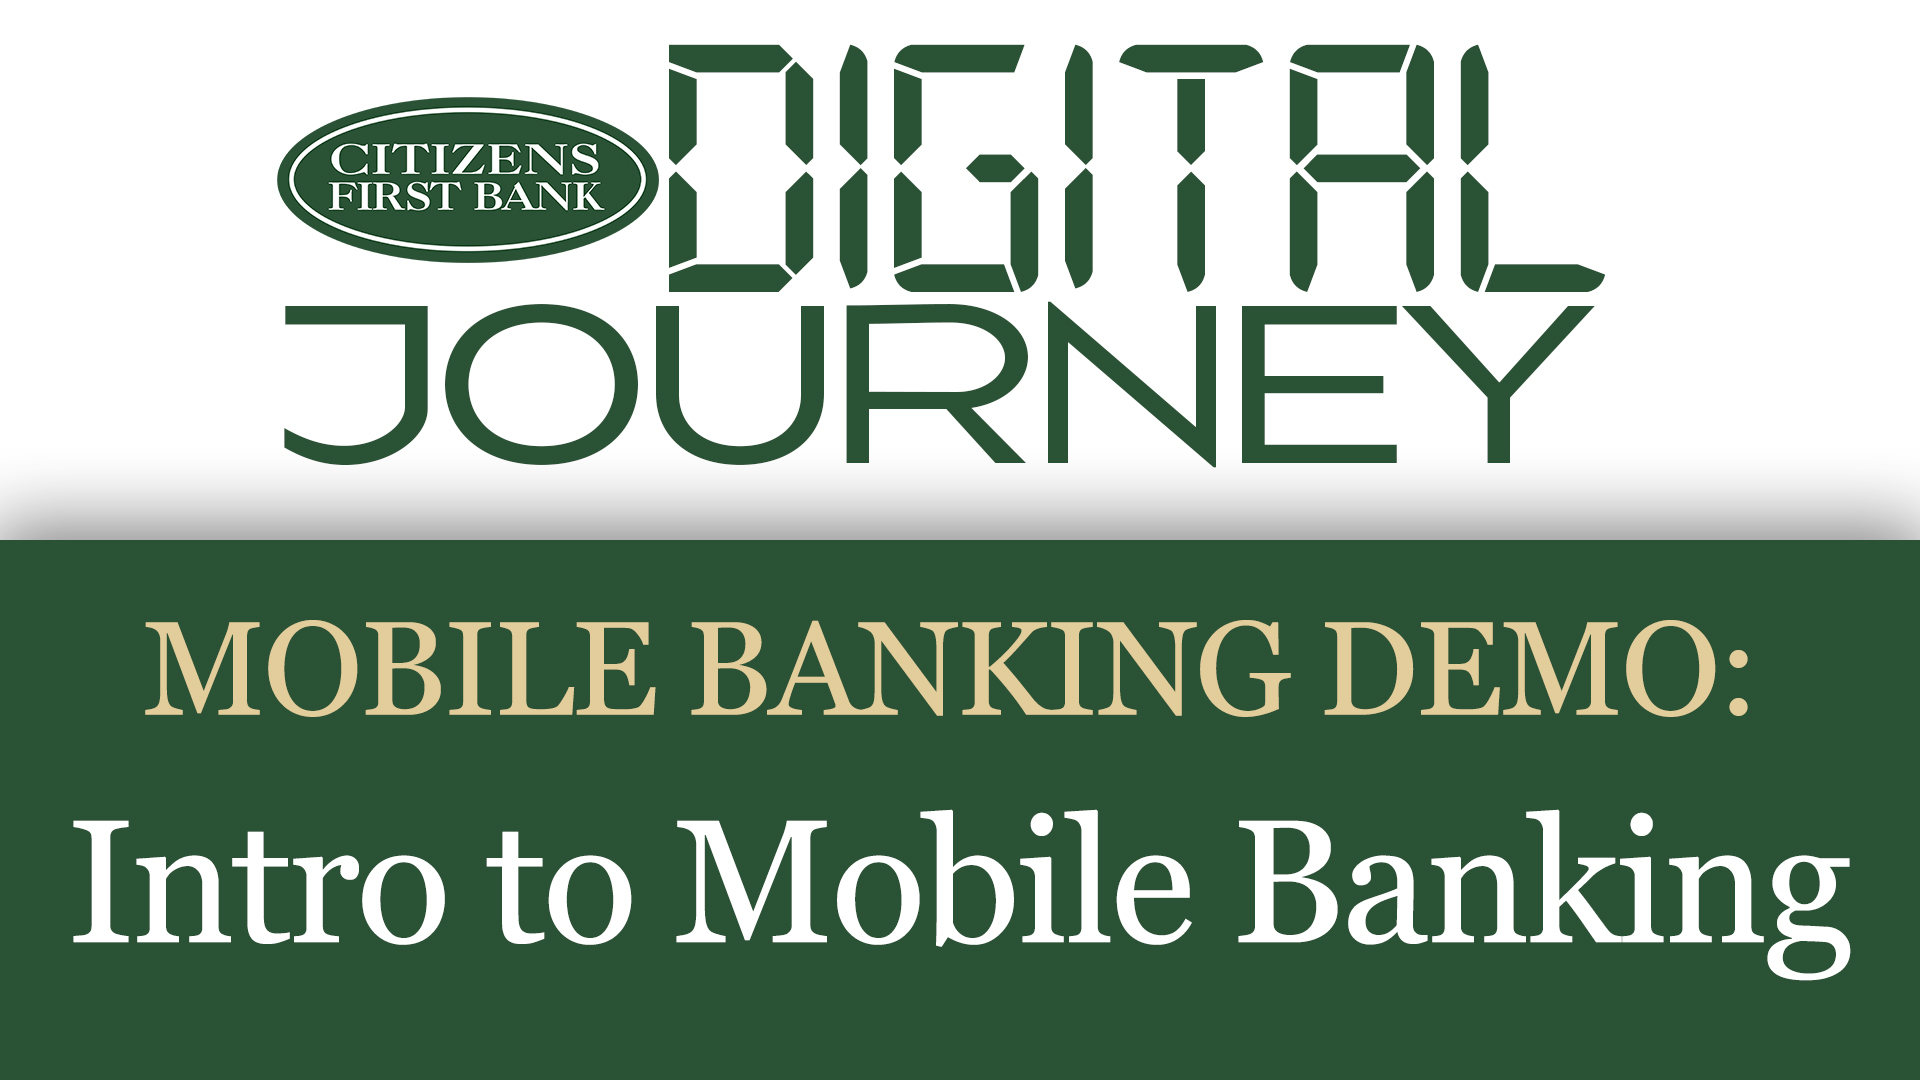 Digital Journey logo with our mobile banking demo: Intro to Mobile Banking